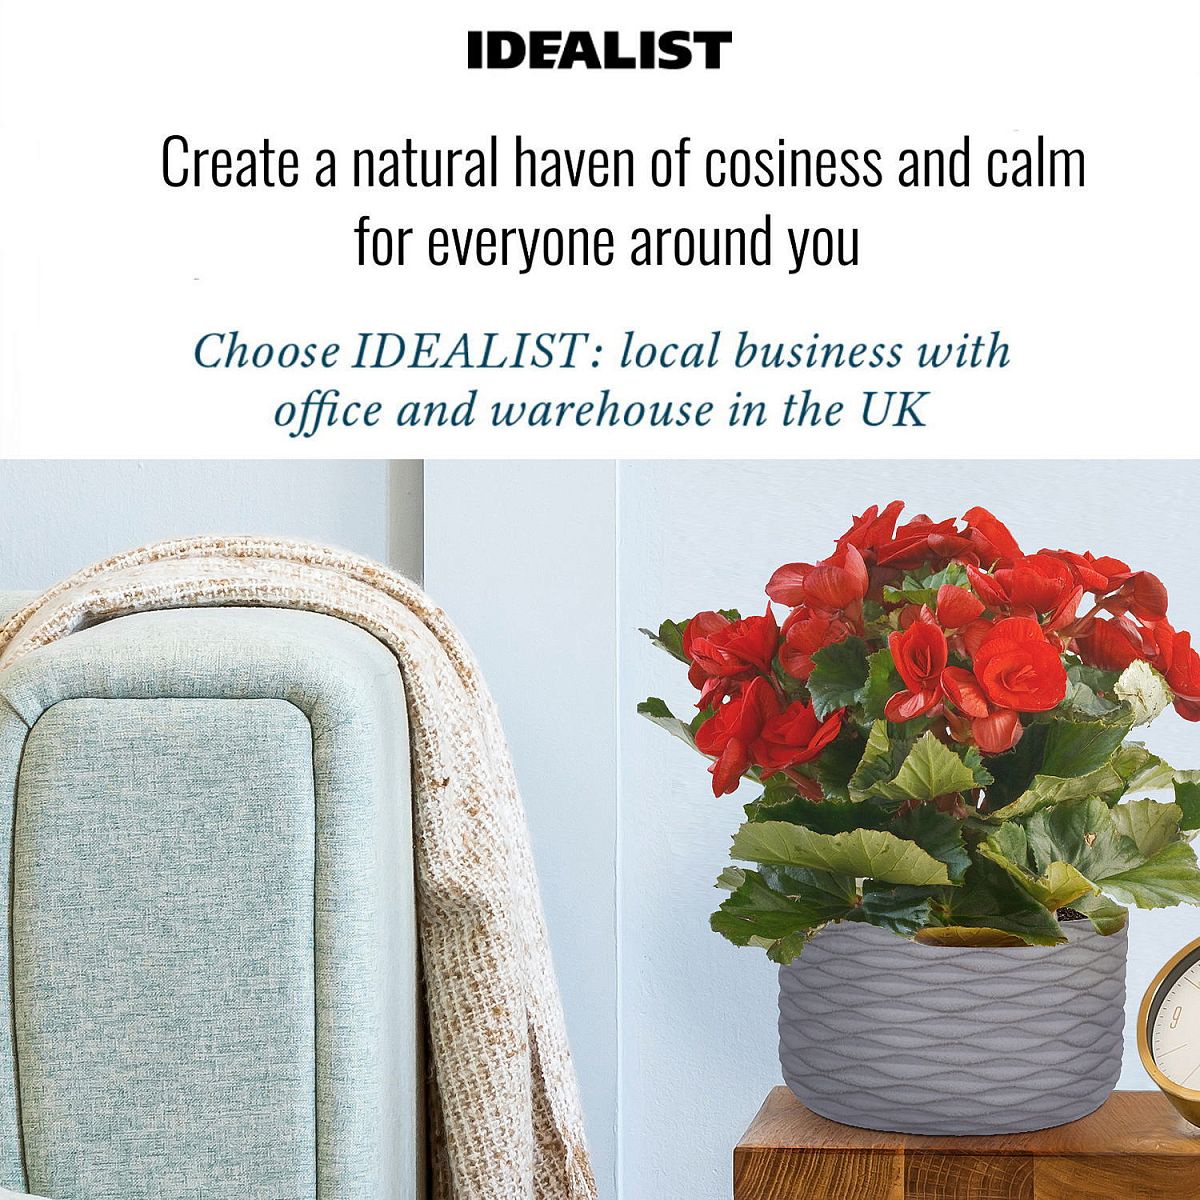 IDEALIST Lite Wave Style Table and Hanging Cylinder Round Plant Pot Dual Use Indoor Planter